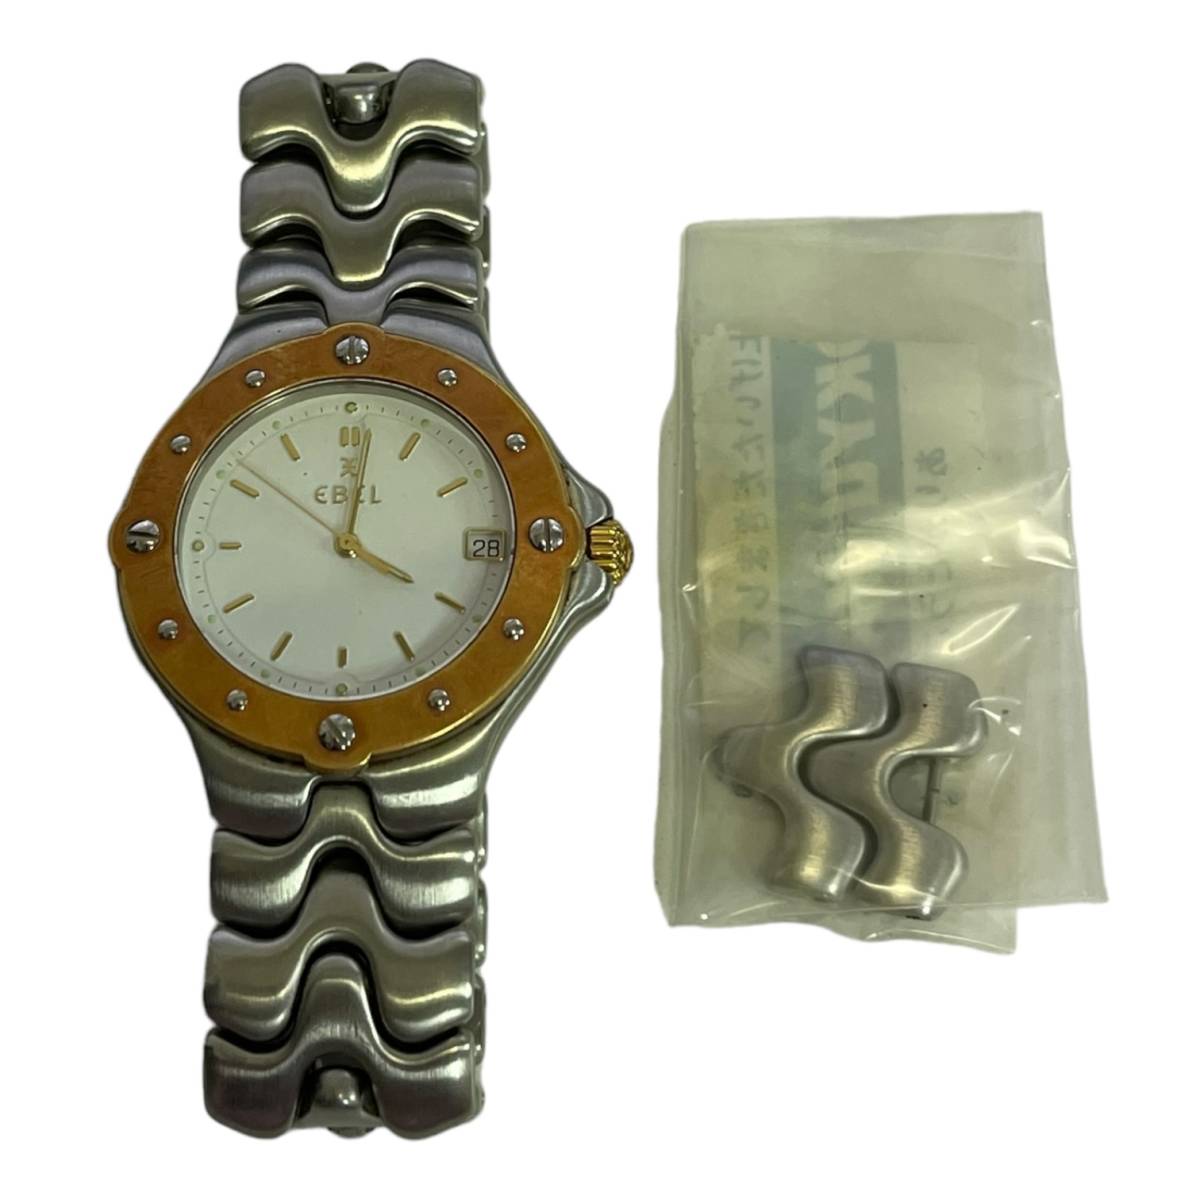 [ secondhand goods ]EBEL Ebel E6187631 face white quarts men's wristwatch Date koma equipped body only hiL2592RO